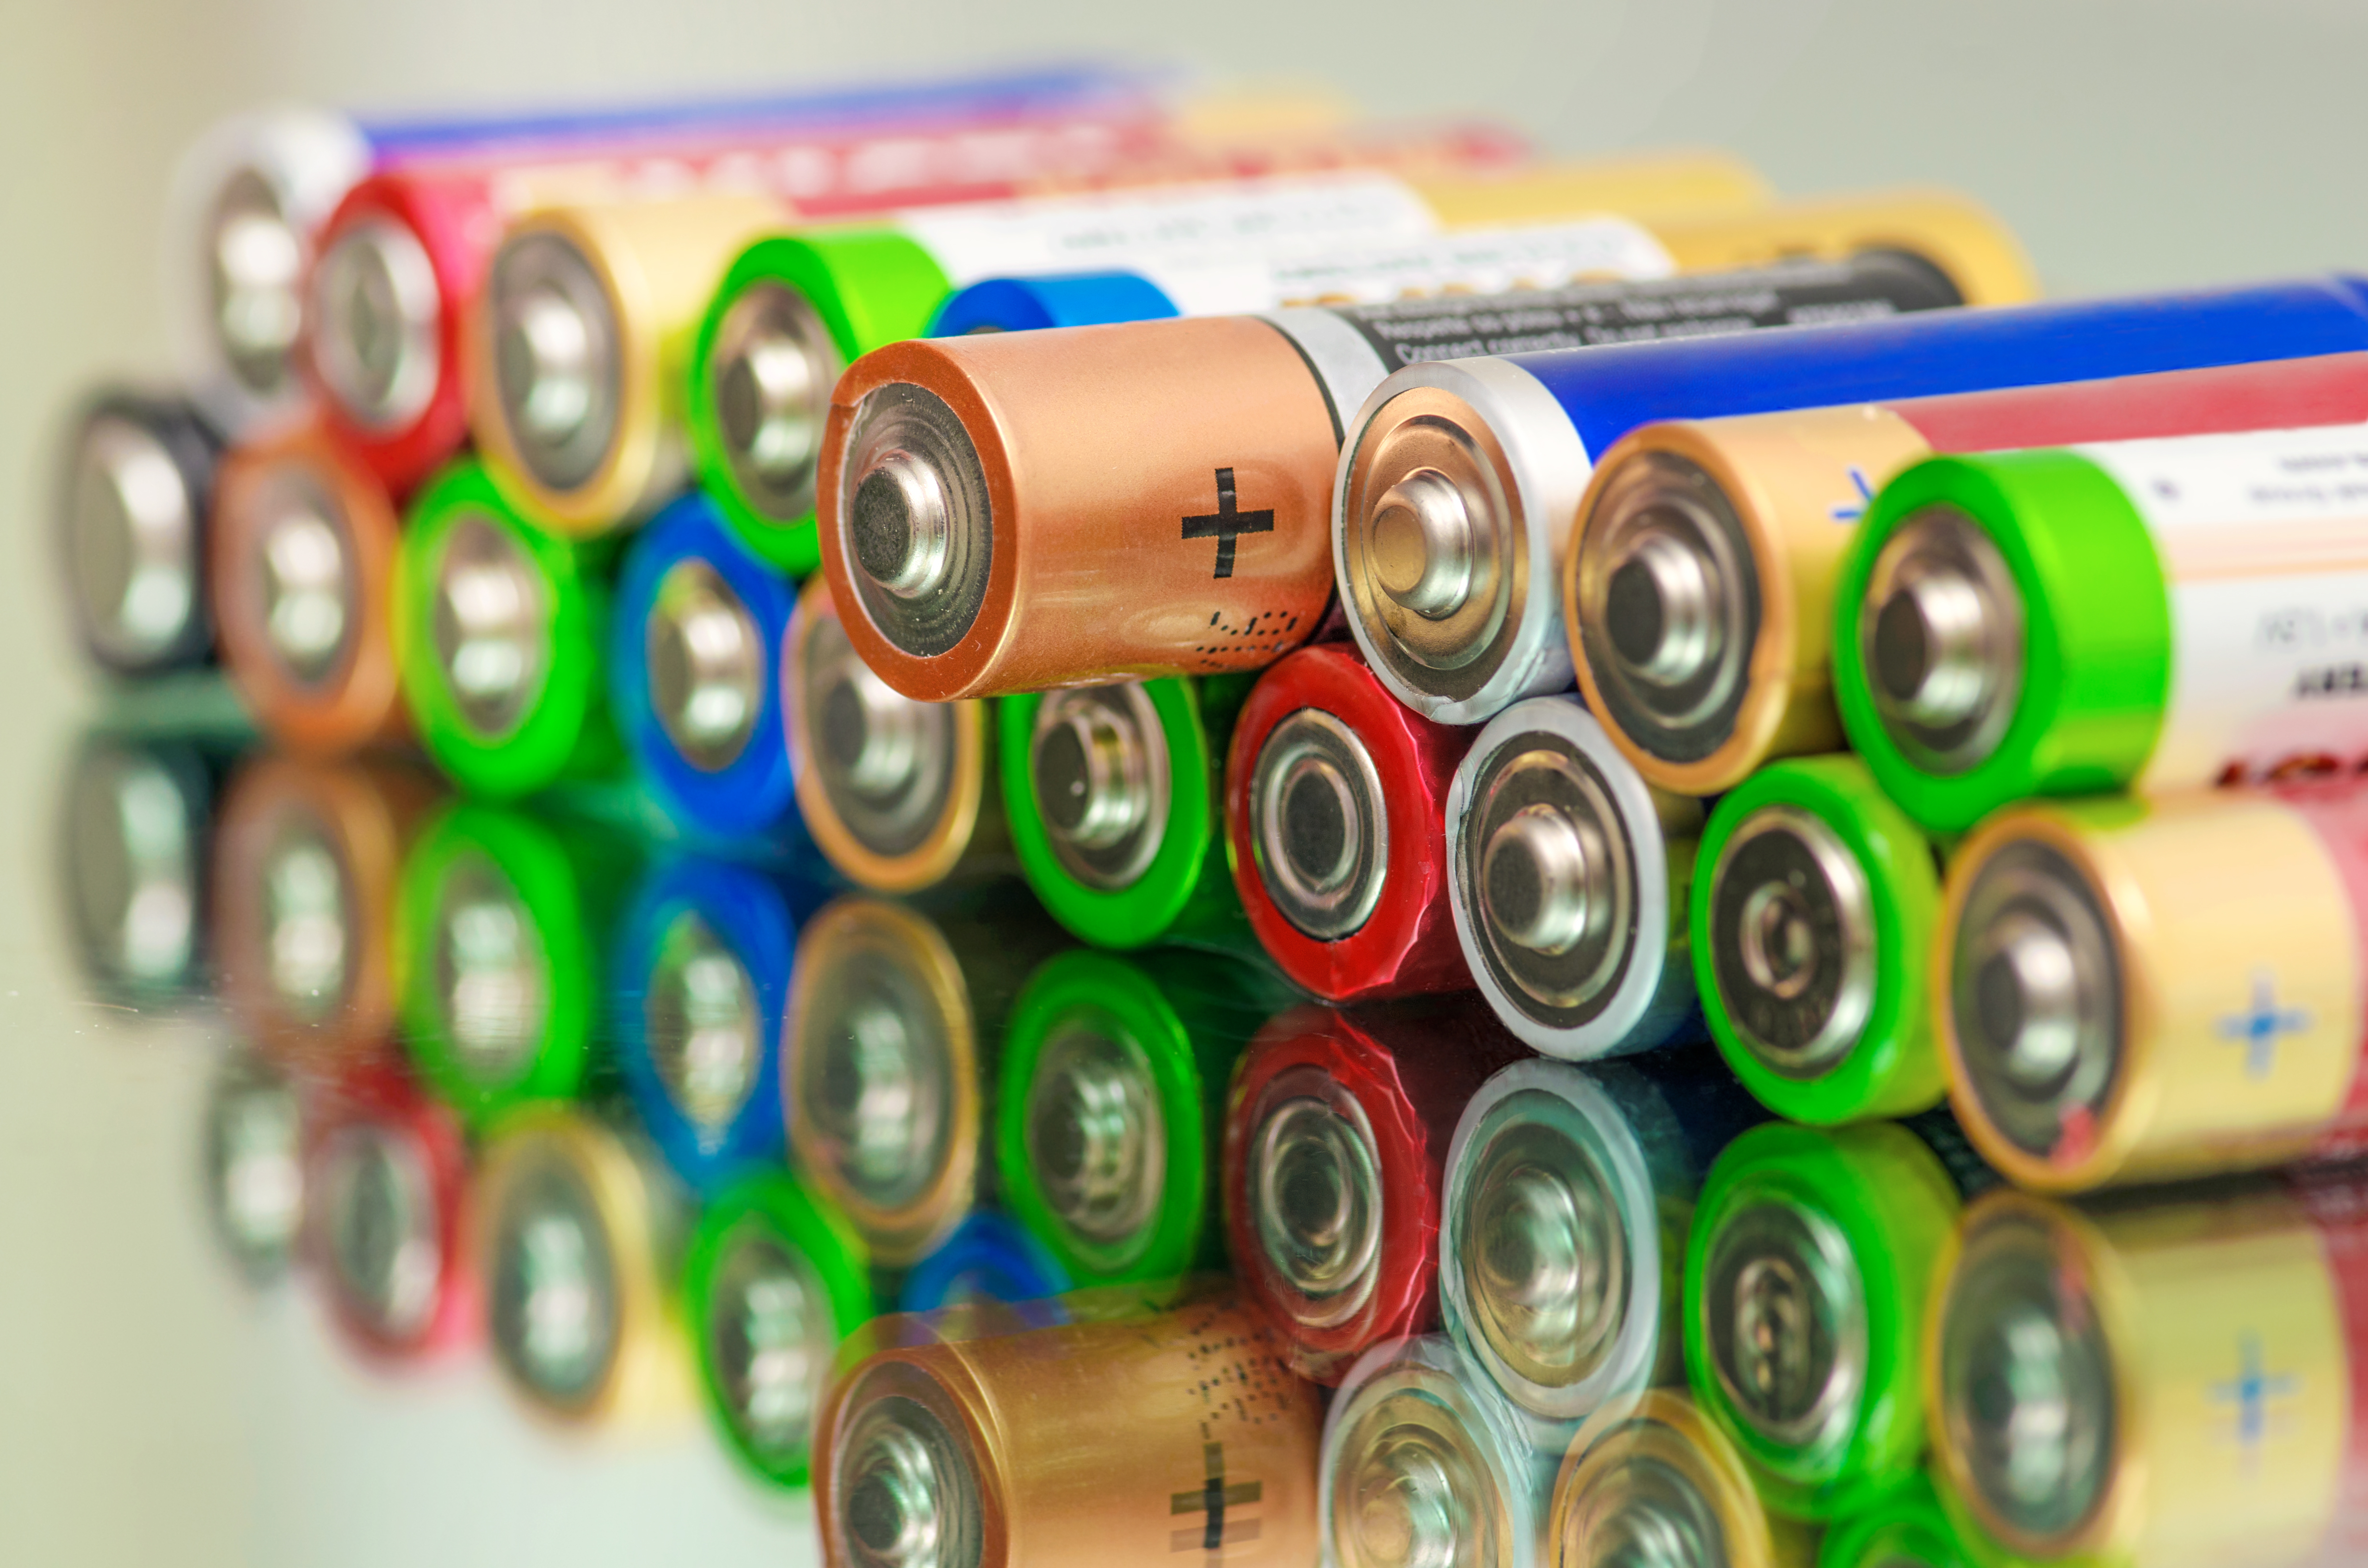 Disposing of used batteries 
safely this Christmas